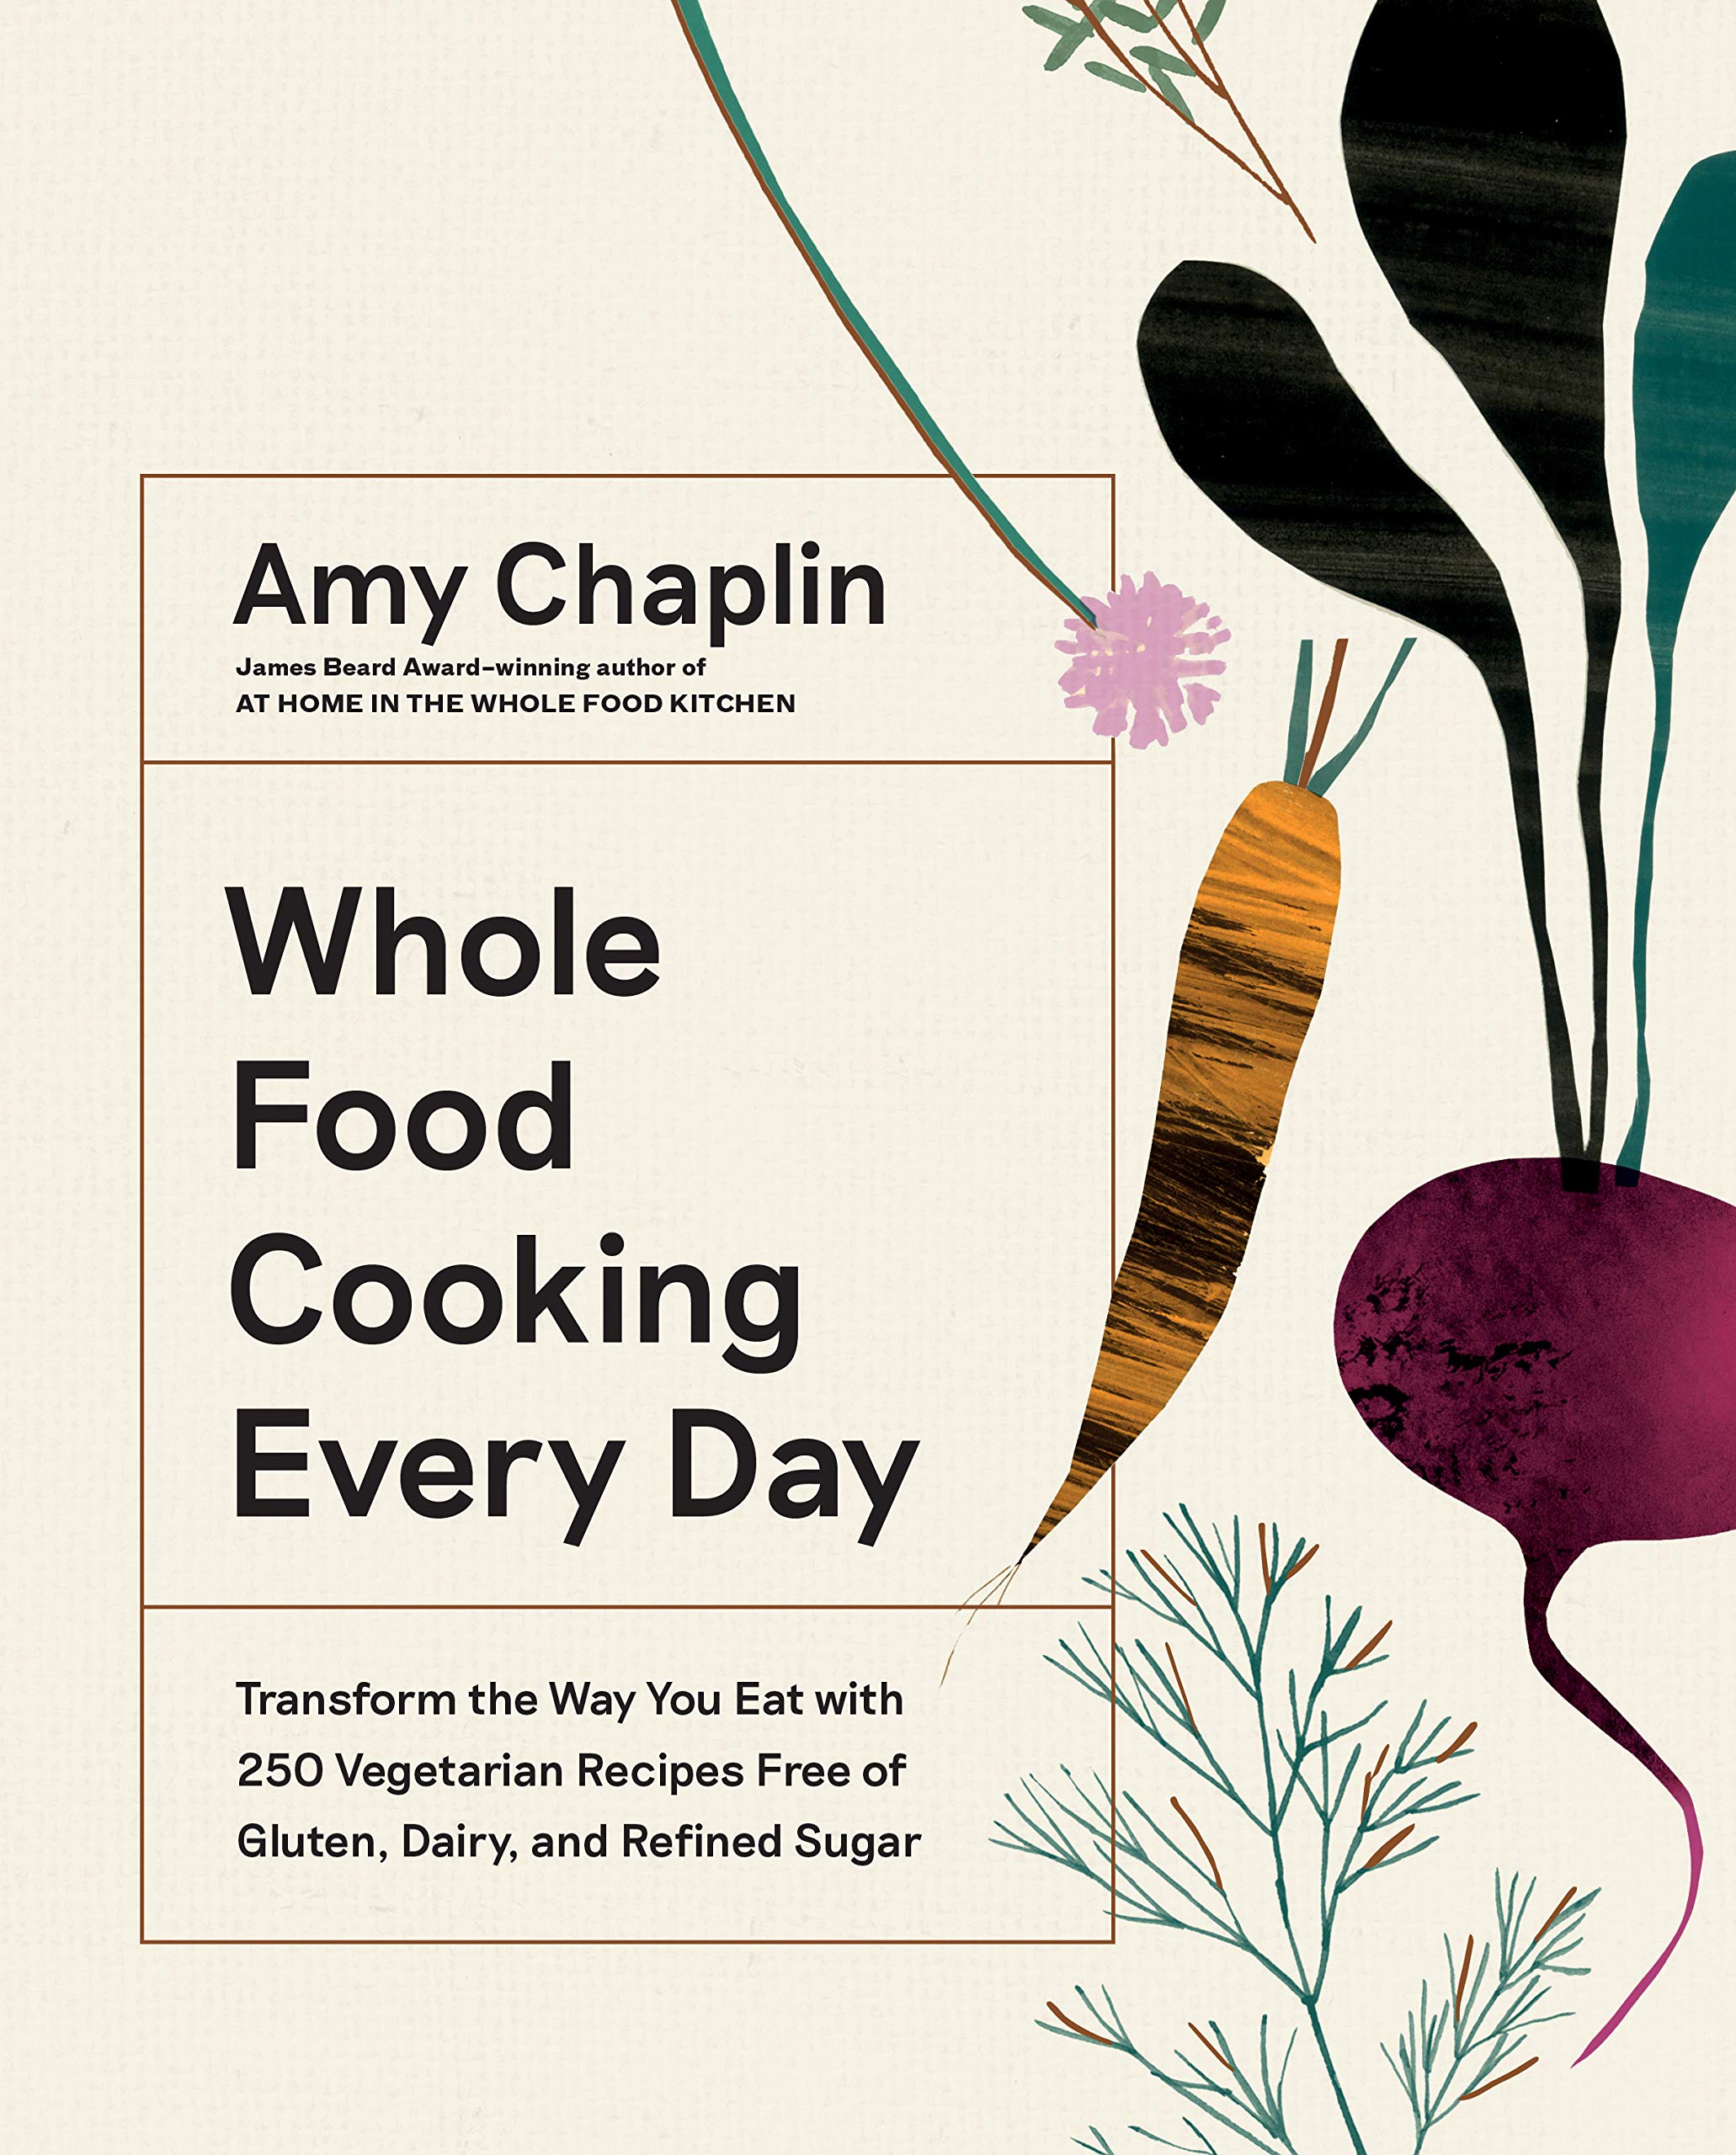 Whole Food Cooking Every Day: Transform the Way You Eat with 250 Vegetarian Recipes Free of Gluten, Dairy, and Refined Sugar (Amy Chaplin)